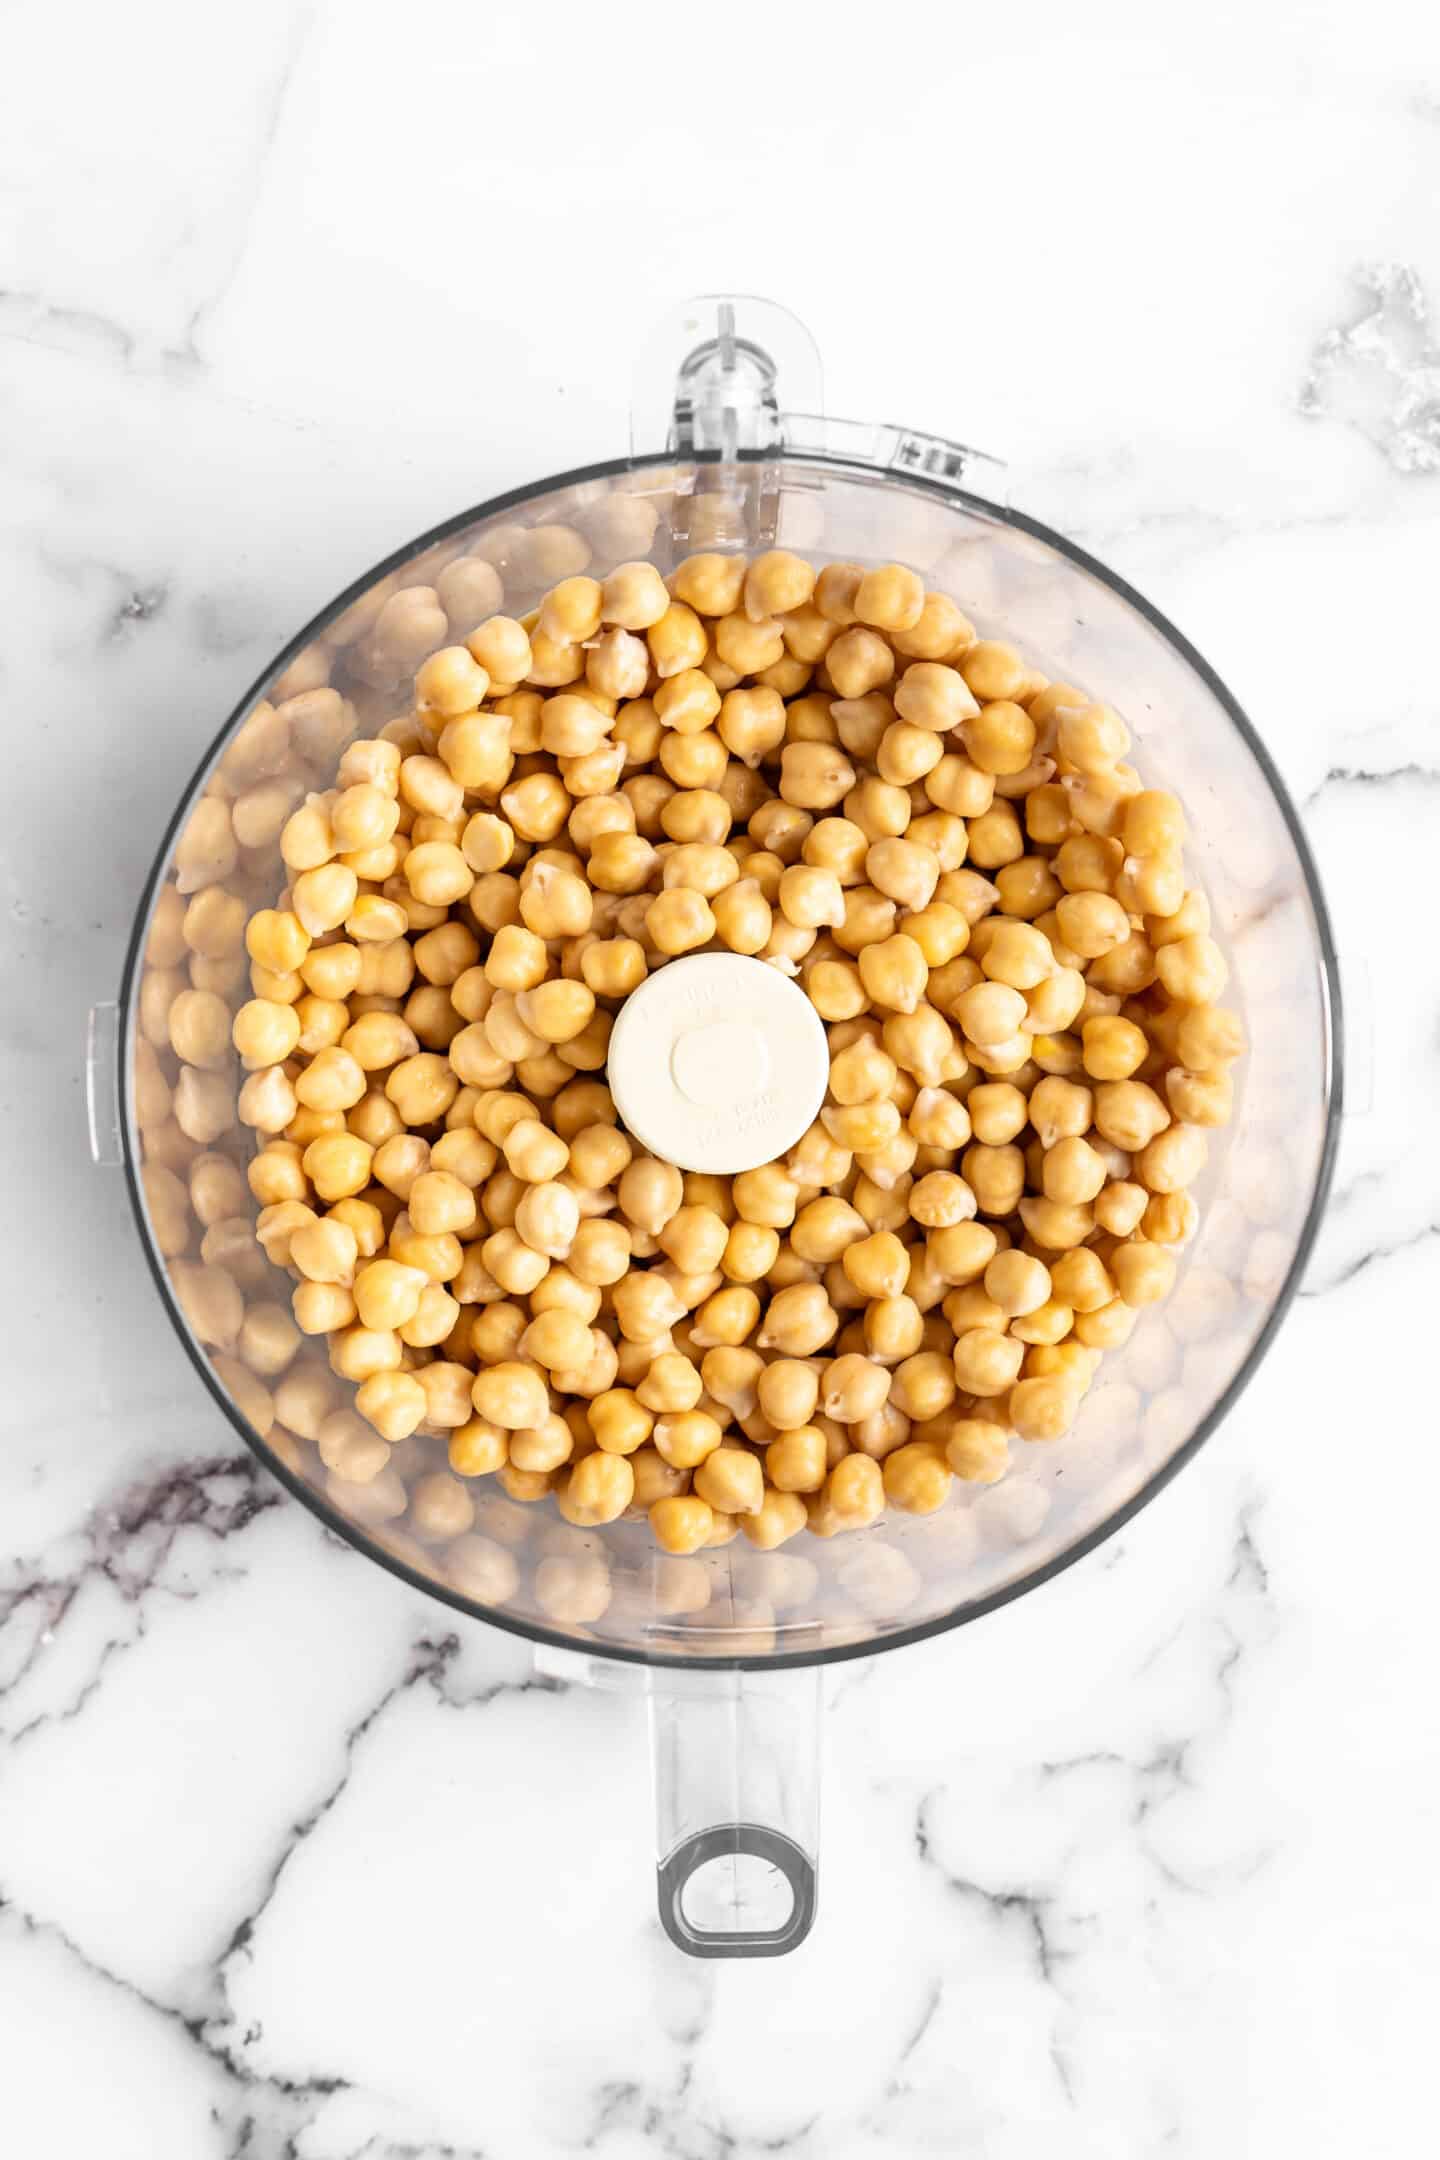 Chickpeas in food processor